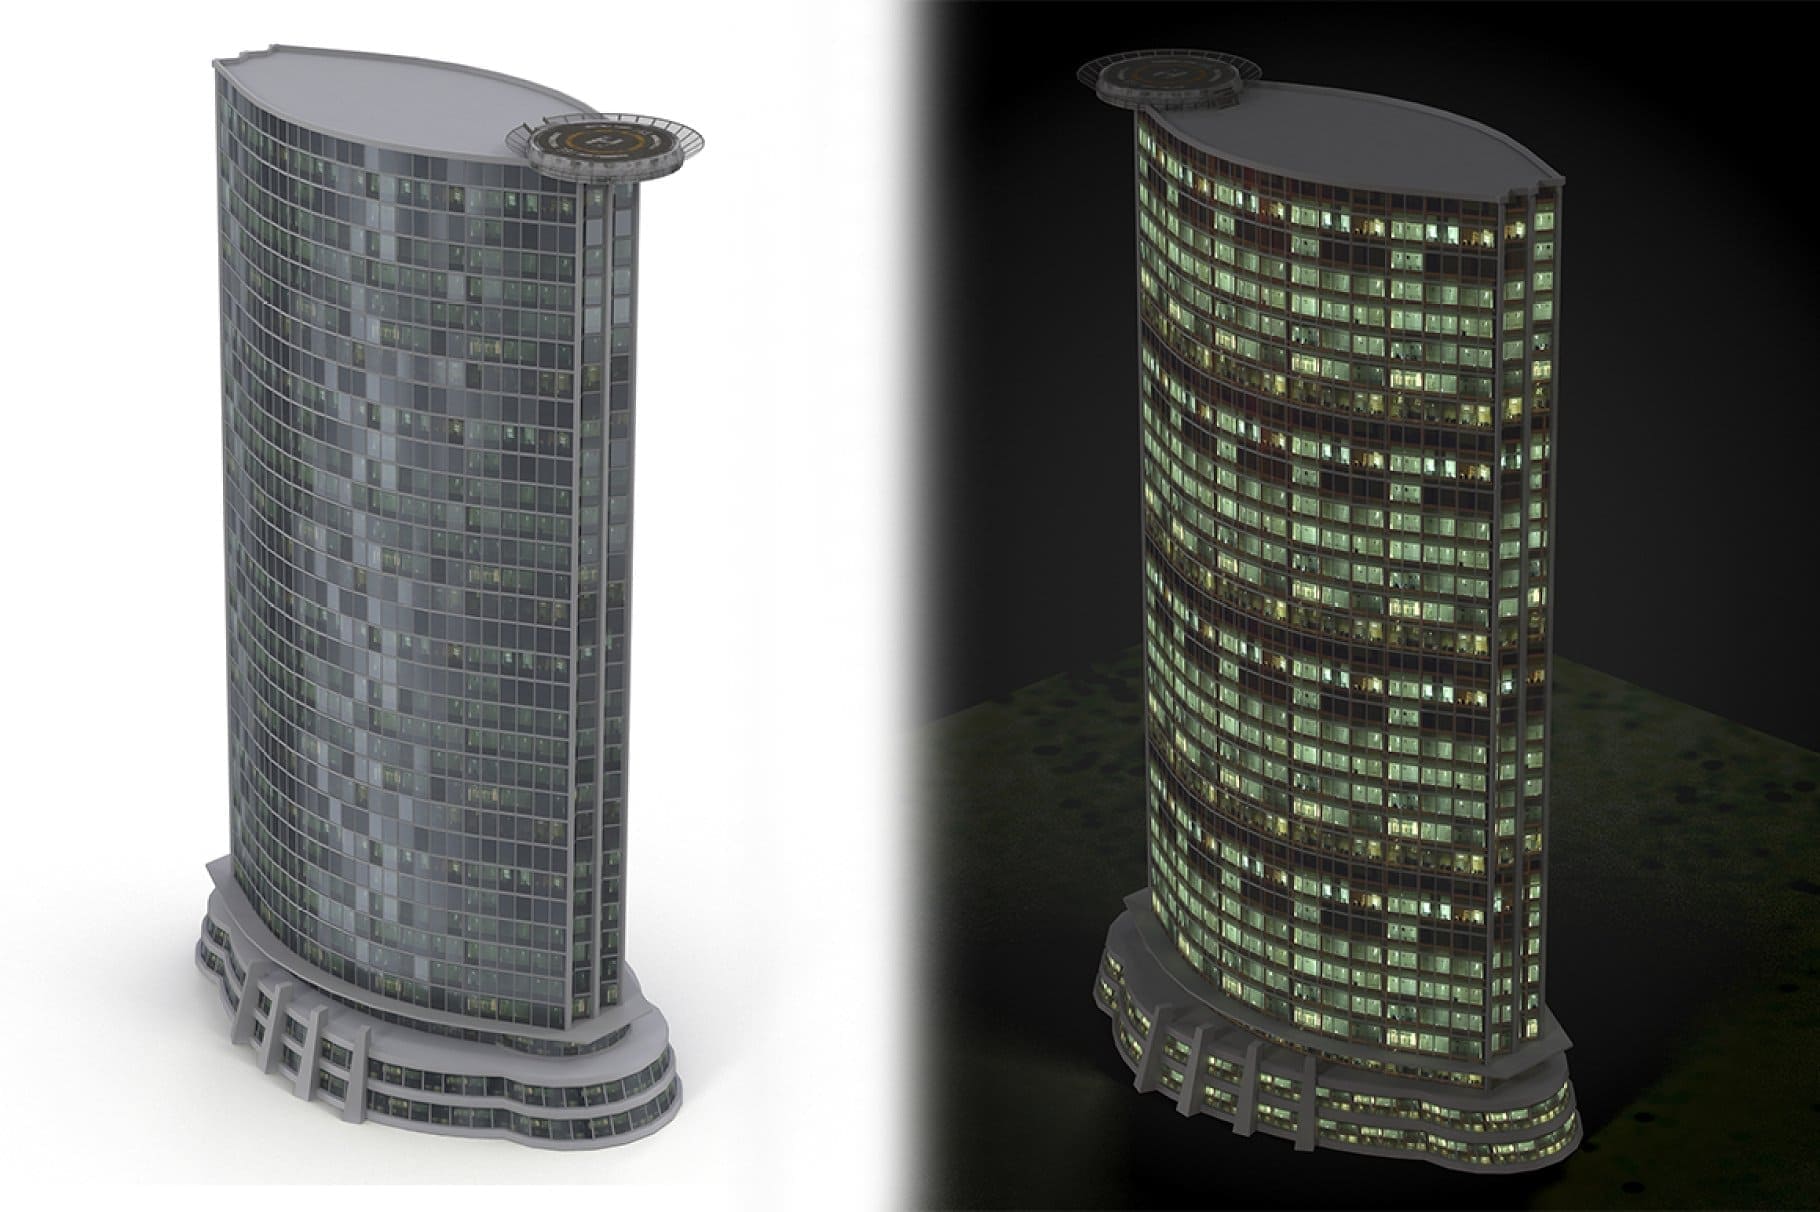 Two models of skyscrapers are shown during the day and at night.